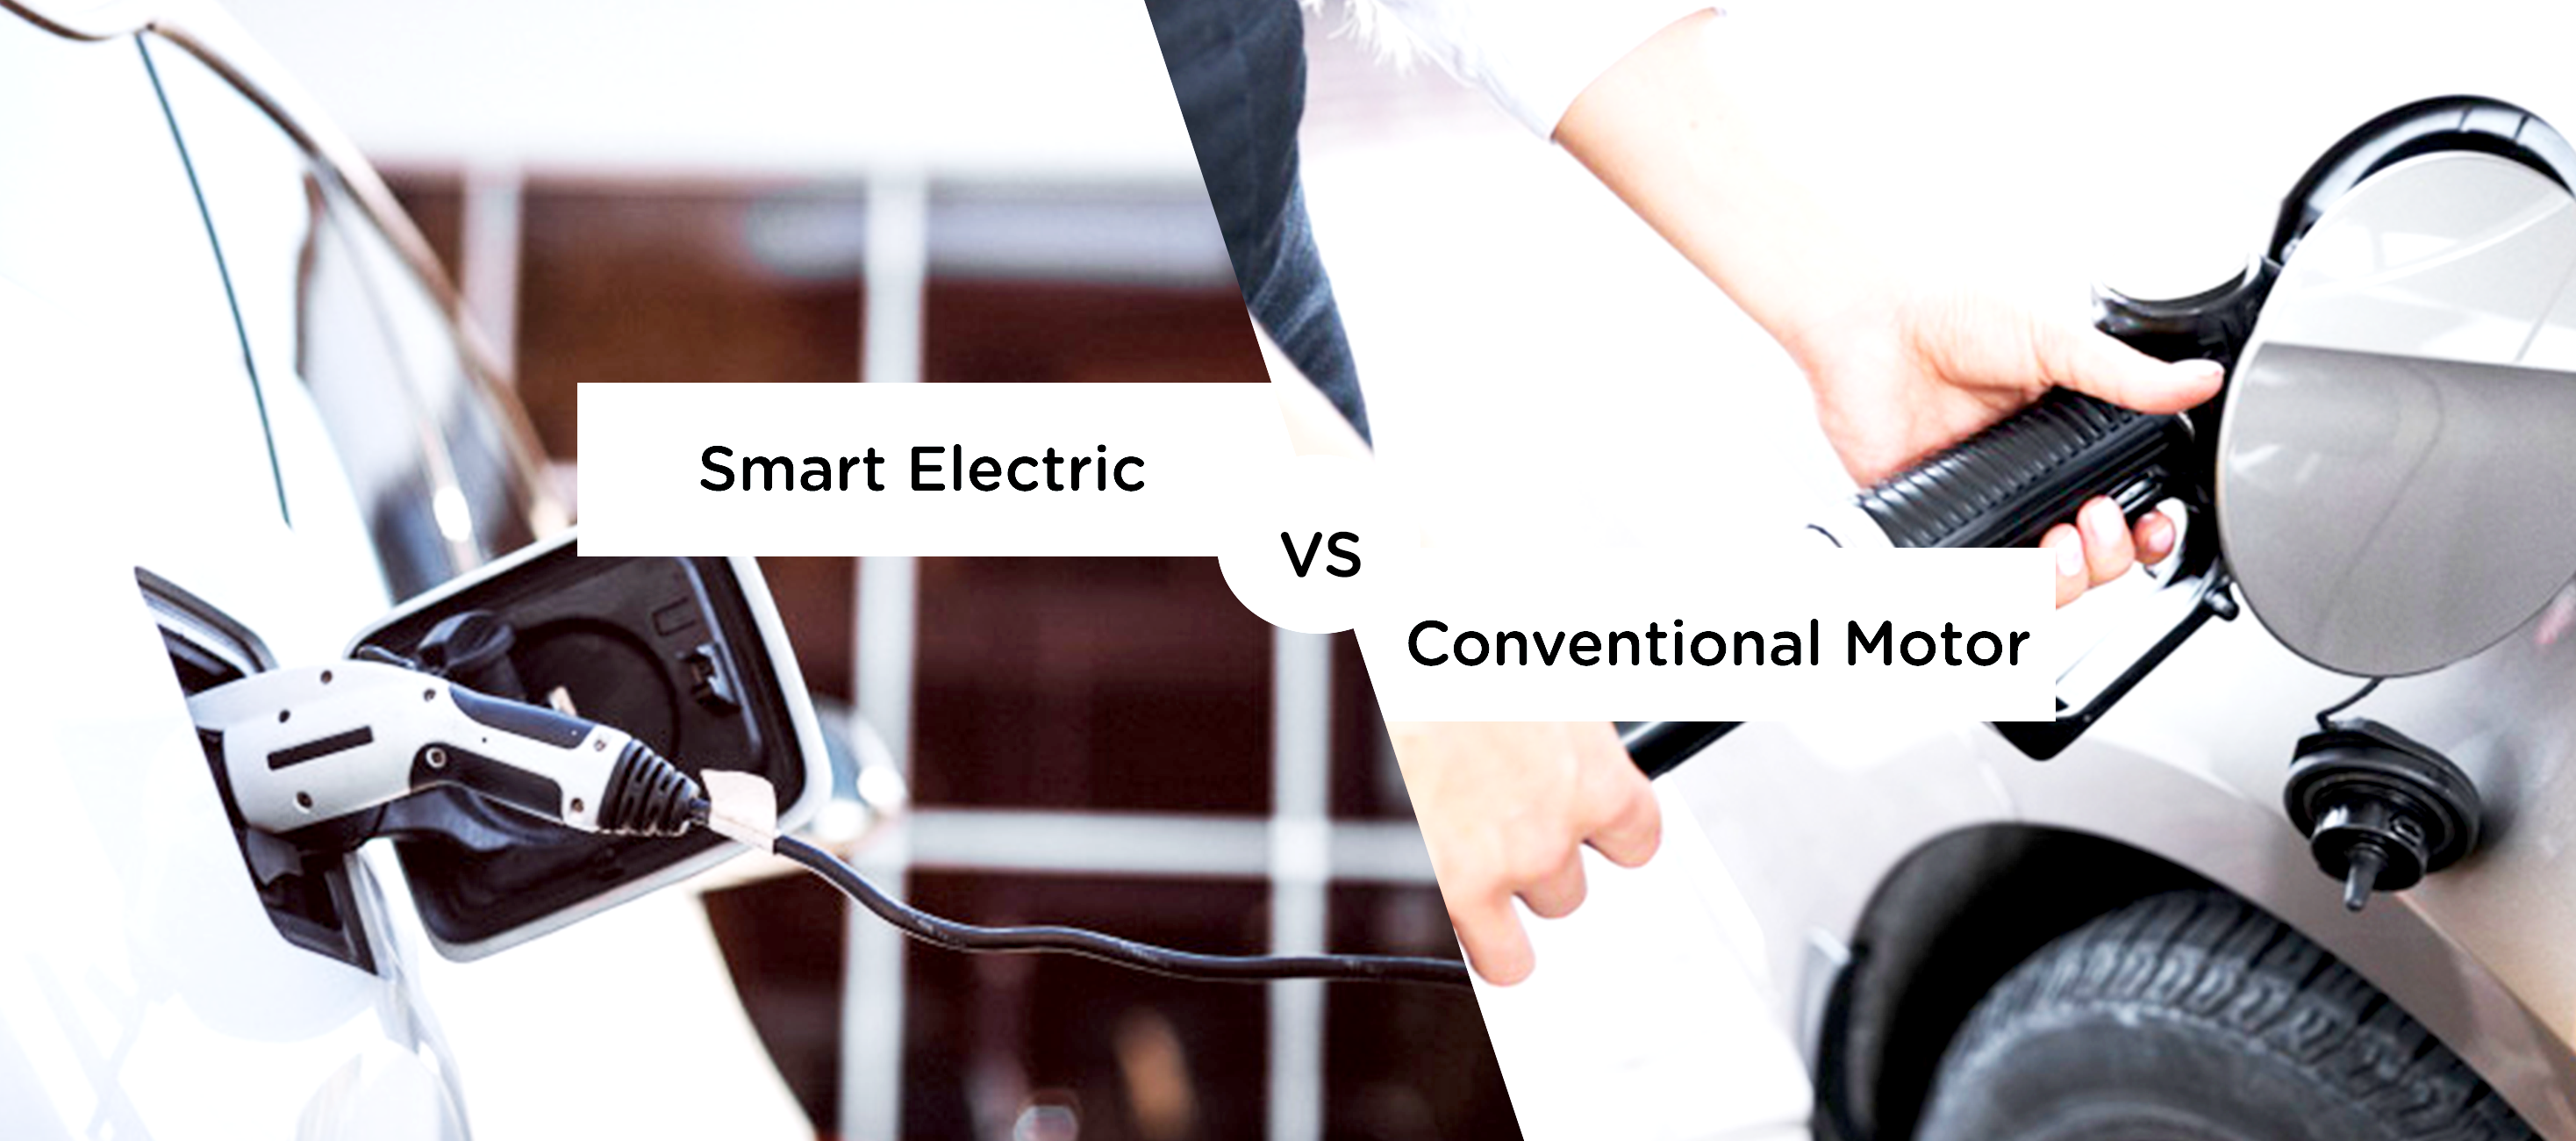 WHY SHOULD YOU OPT FOR SMART ELECTRIC SCOOTERS OVER CONVENTIONAL MOTOR VEHICLES?